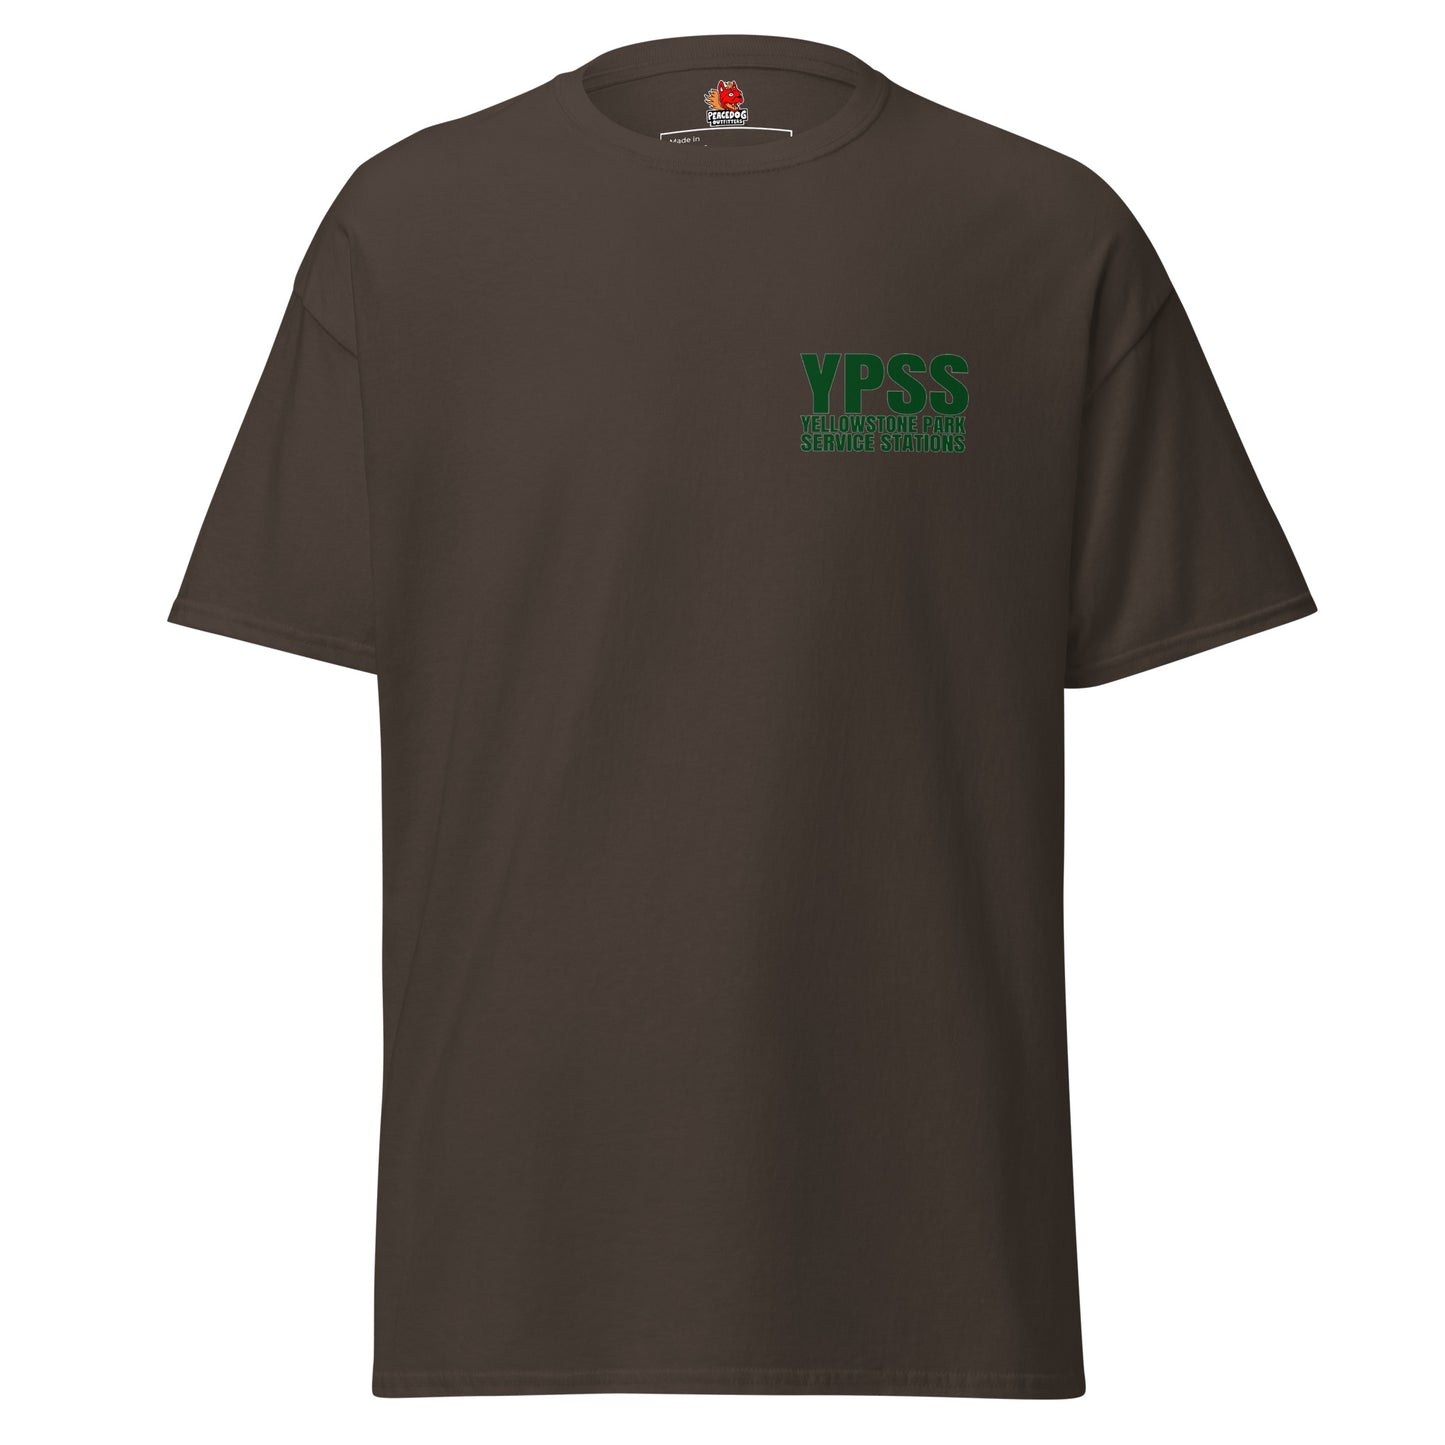 YPSS Yellowstone Park Service Stations - Old Faithul Upper Station - Classic Tee